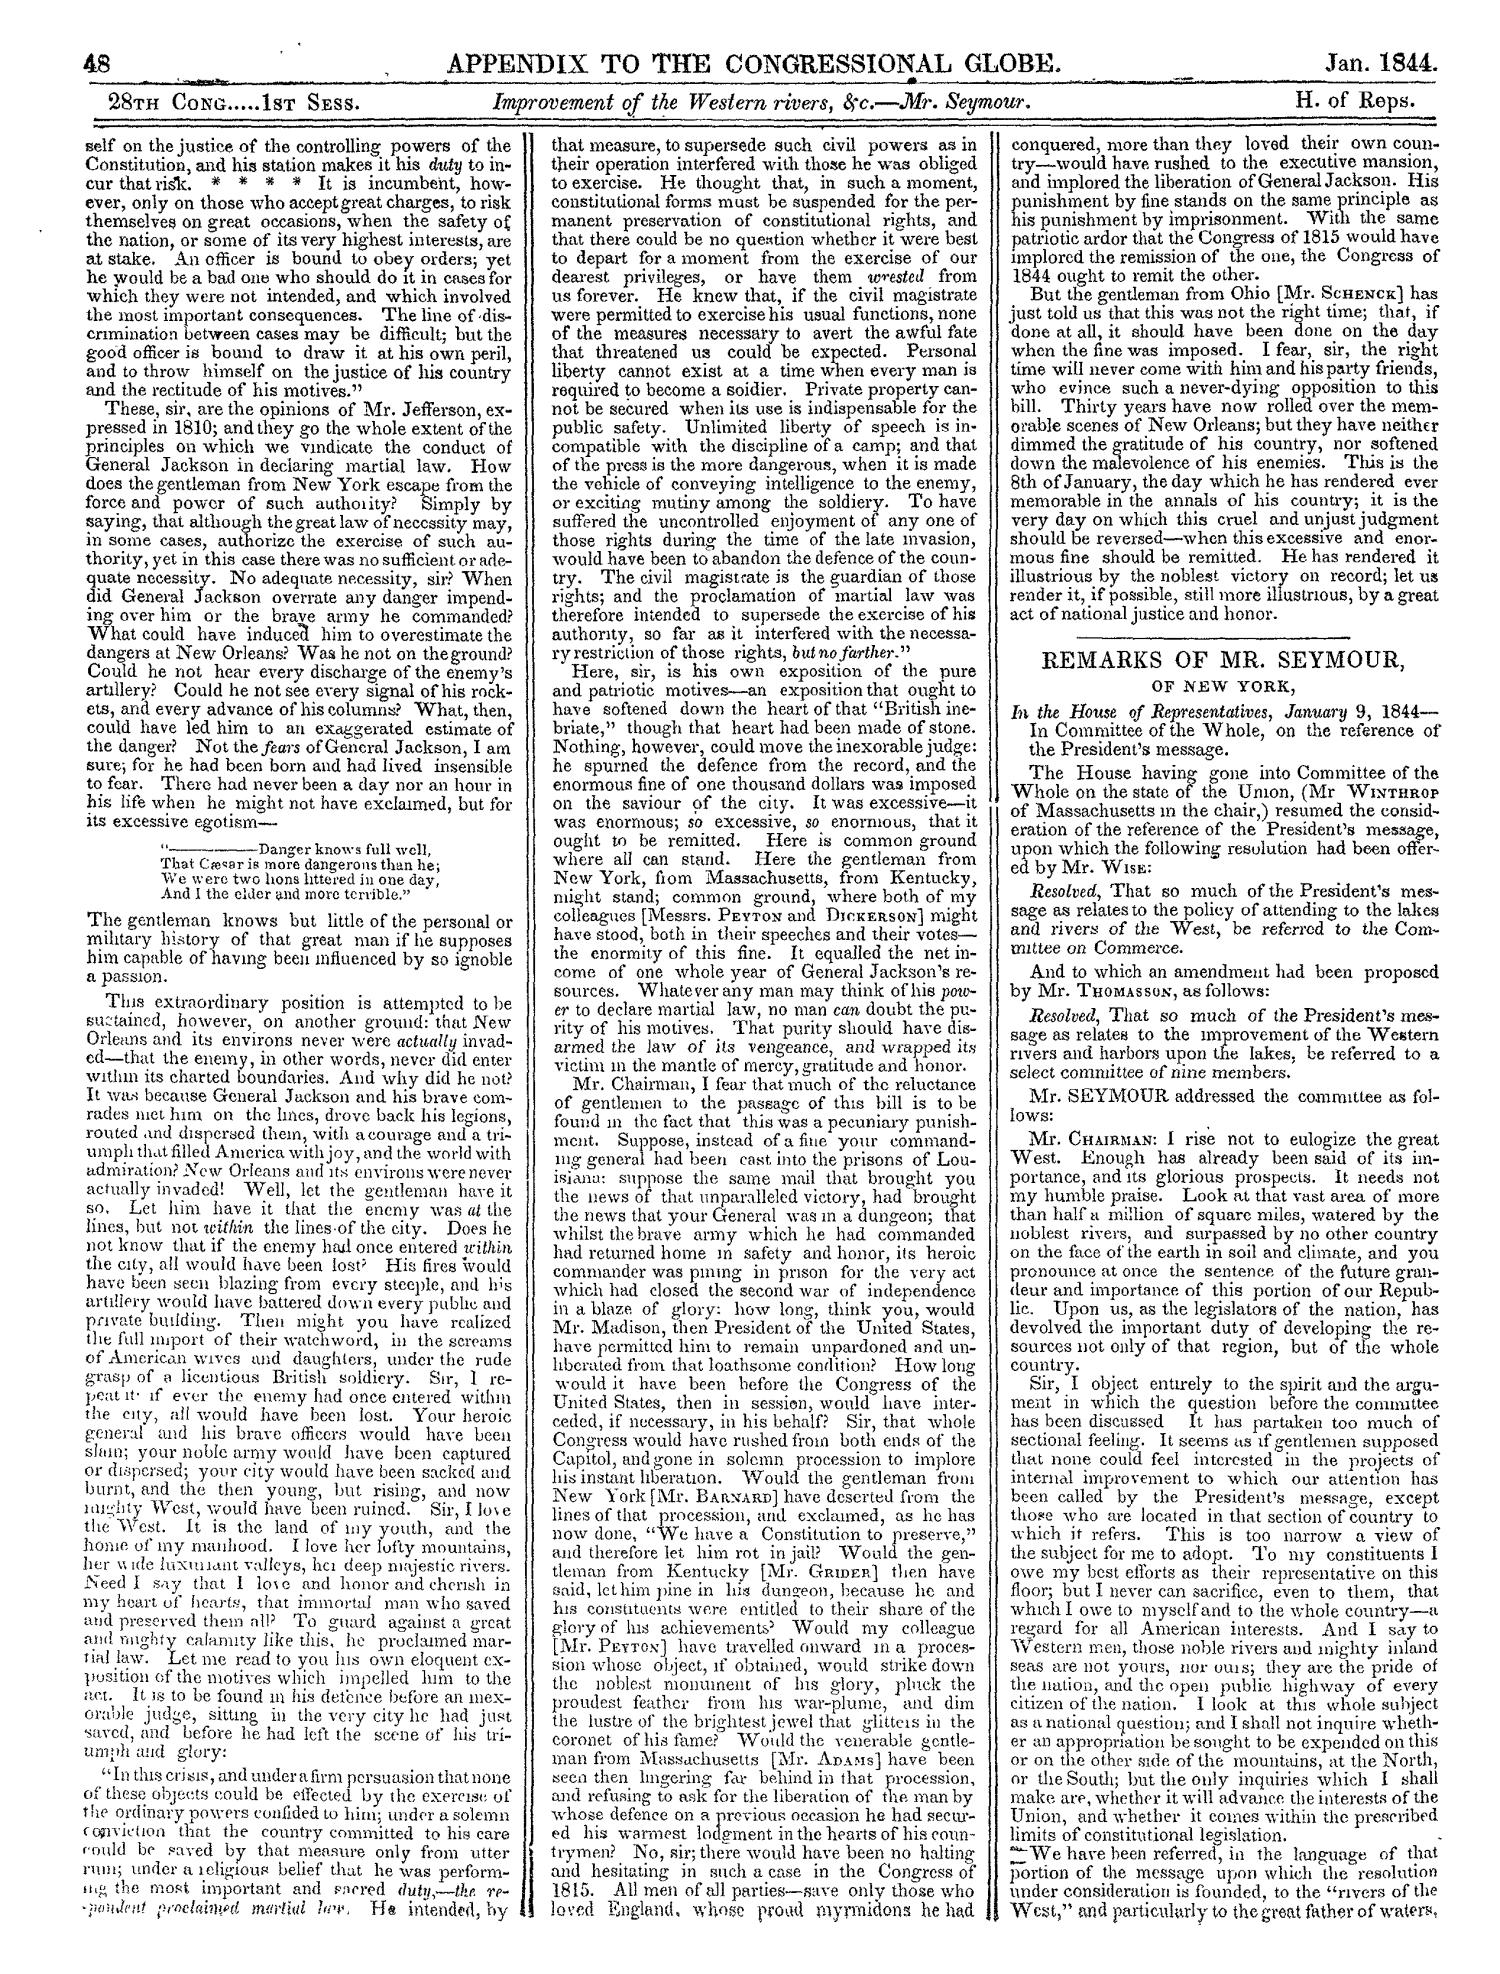 The Congressional Globe, Volume 13, Part 2: Twenty-Eighth Congress, First Session
                                                
                                                    48
                                                